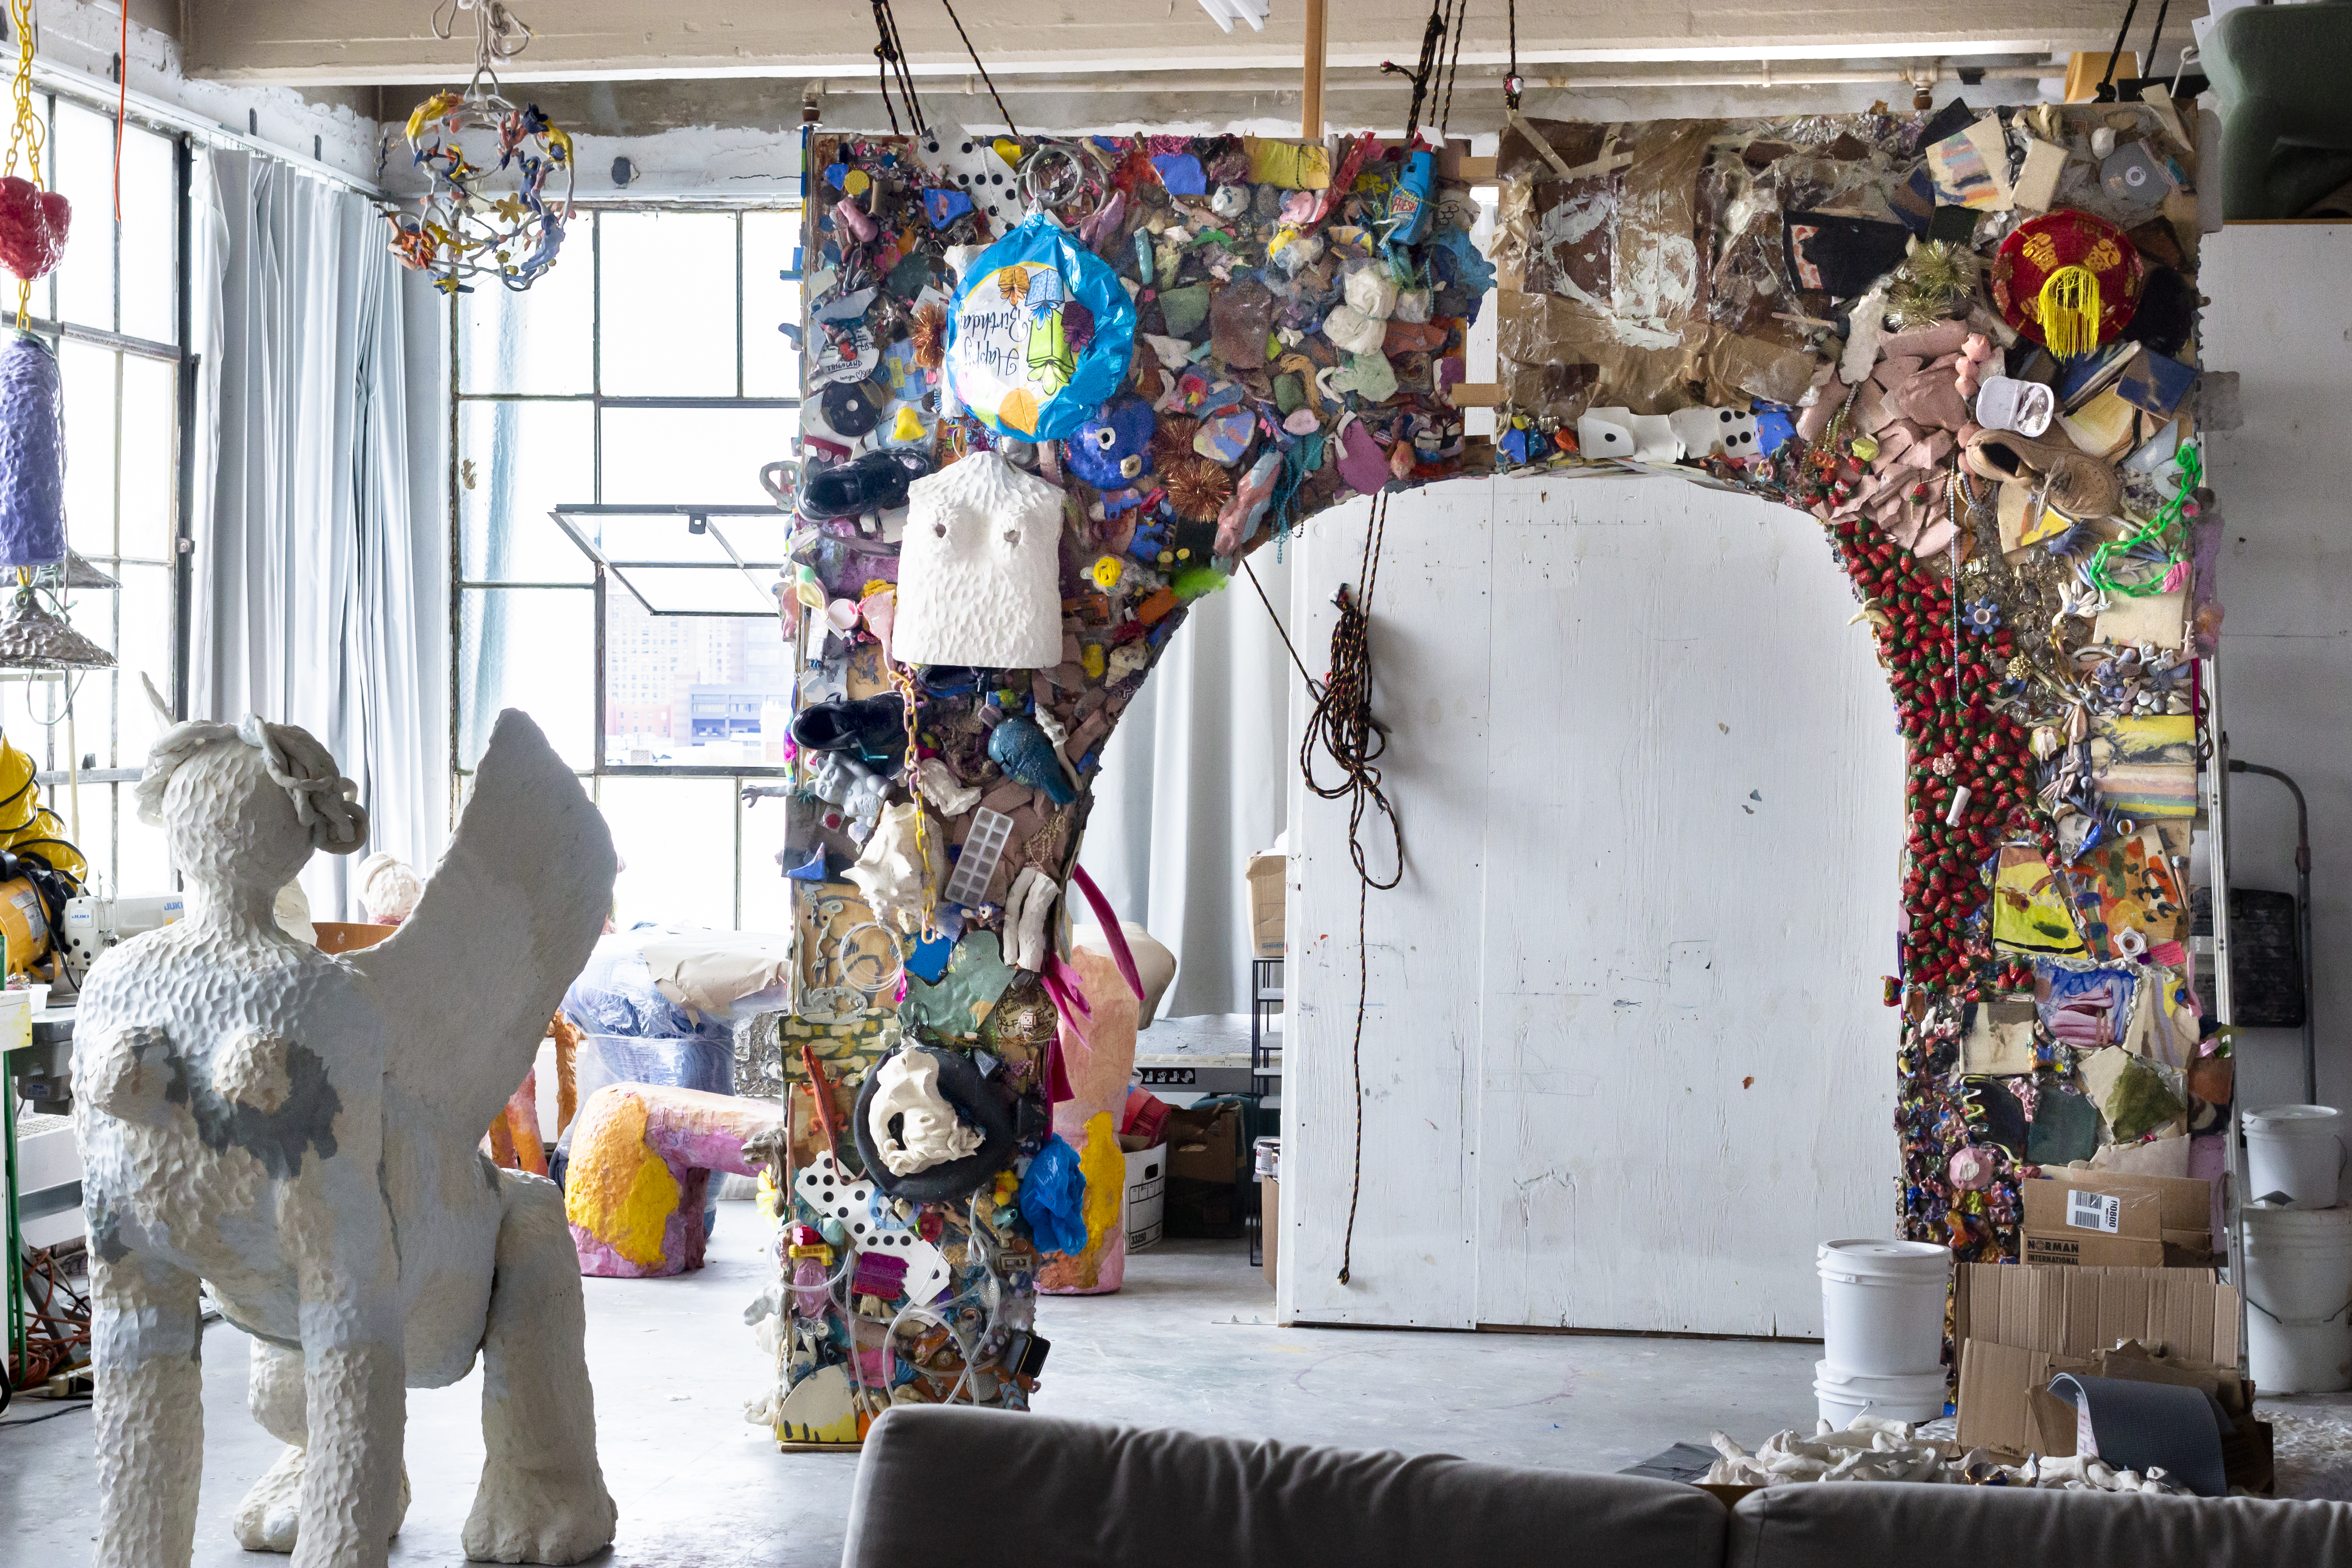 Photo of sculptures made from trash